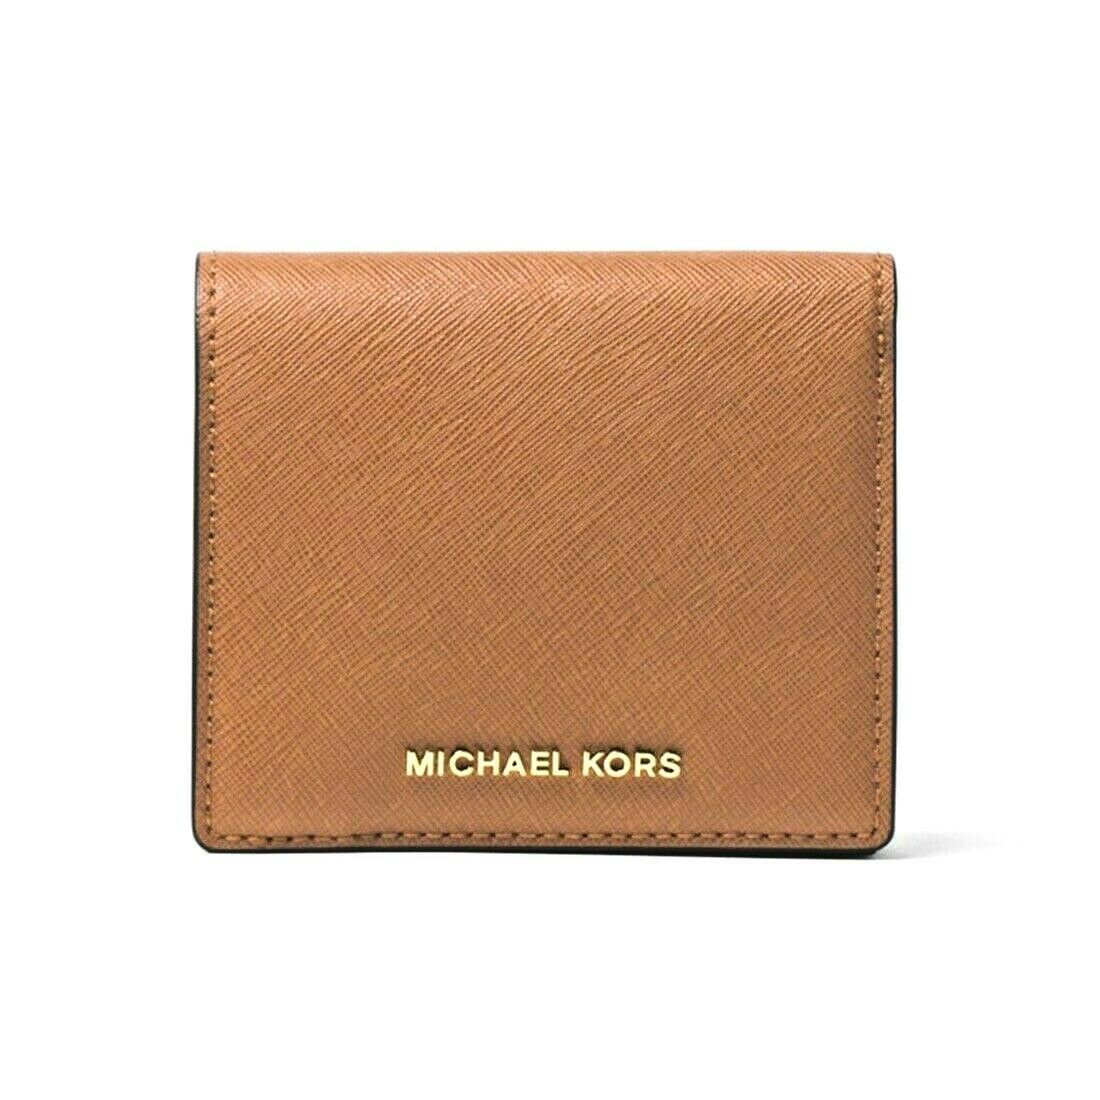 NWT Authentic MICHAEL KORS Mercer Carryall Card Case Wallet 32T6GTVD2L LUGGAGE - $72.26